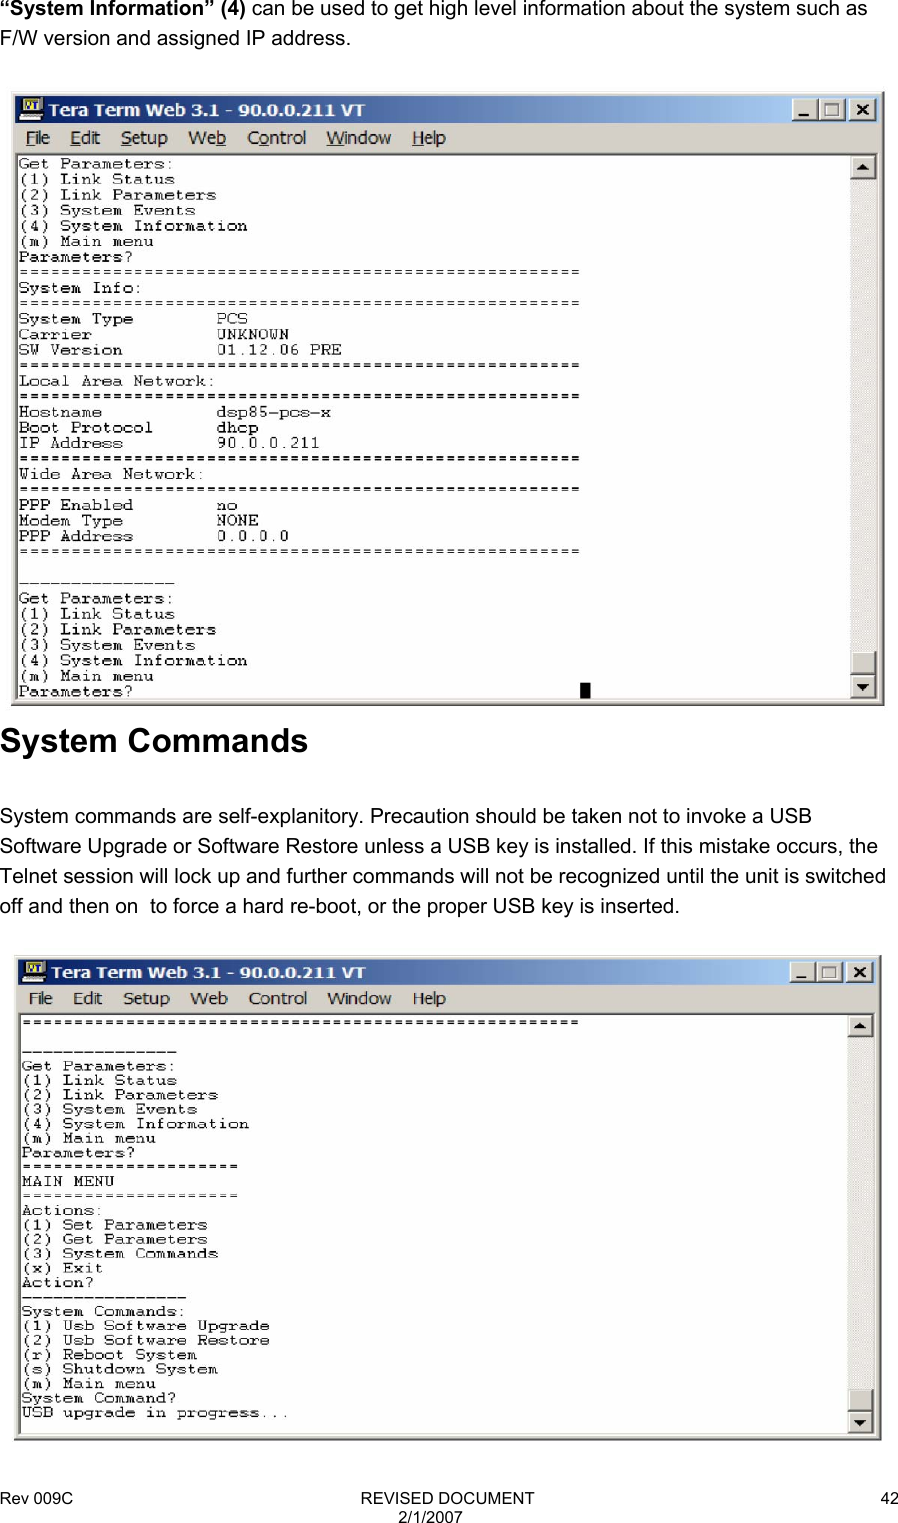 Rev 009C                                                              REVISED DOCUMENT 2/1/2007 42“System Information” (4) can be used to get high level information about the system such as F/W version and assigned IP address.   System Commands  System commands are self-explanitory. Precaution should be taken not to invoke a USB Software Upgrade or Software Restore unless a USB key is installed. If this mistake occurs, the Telnet session will lock up and further commands will not be recognized until the unit is switched off and then on  to force a hard re-boot, or the proper USB key is inserted.   